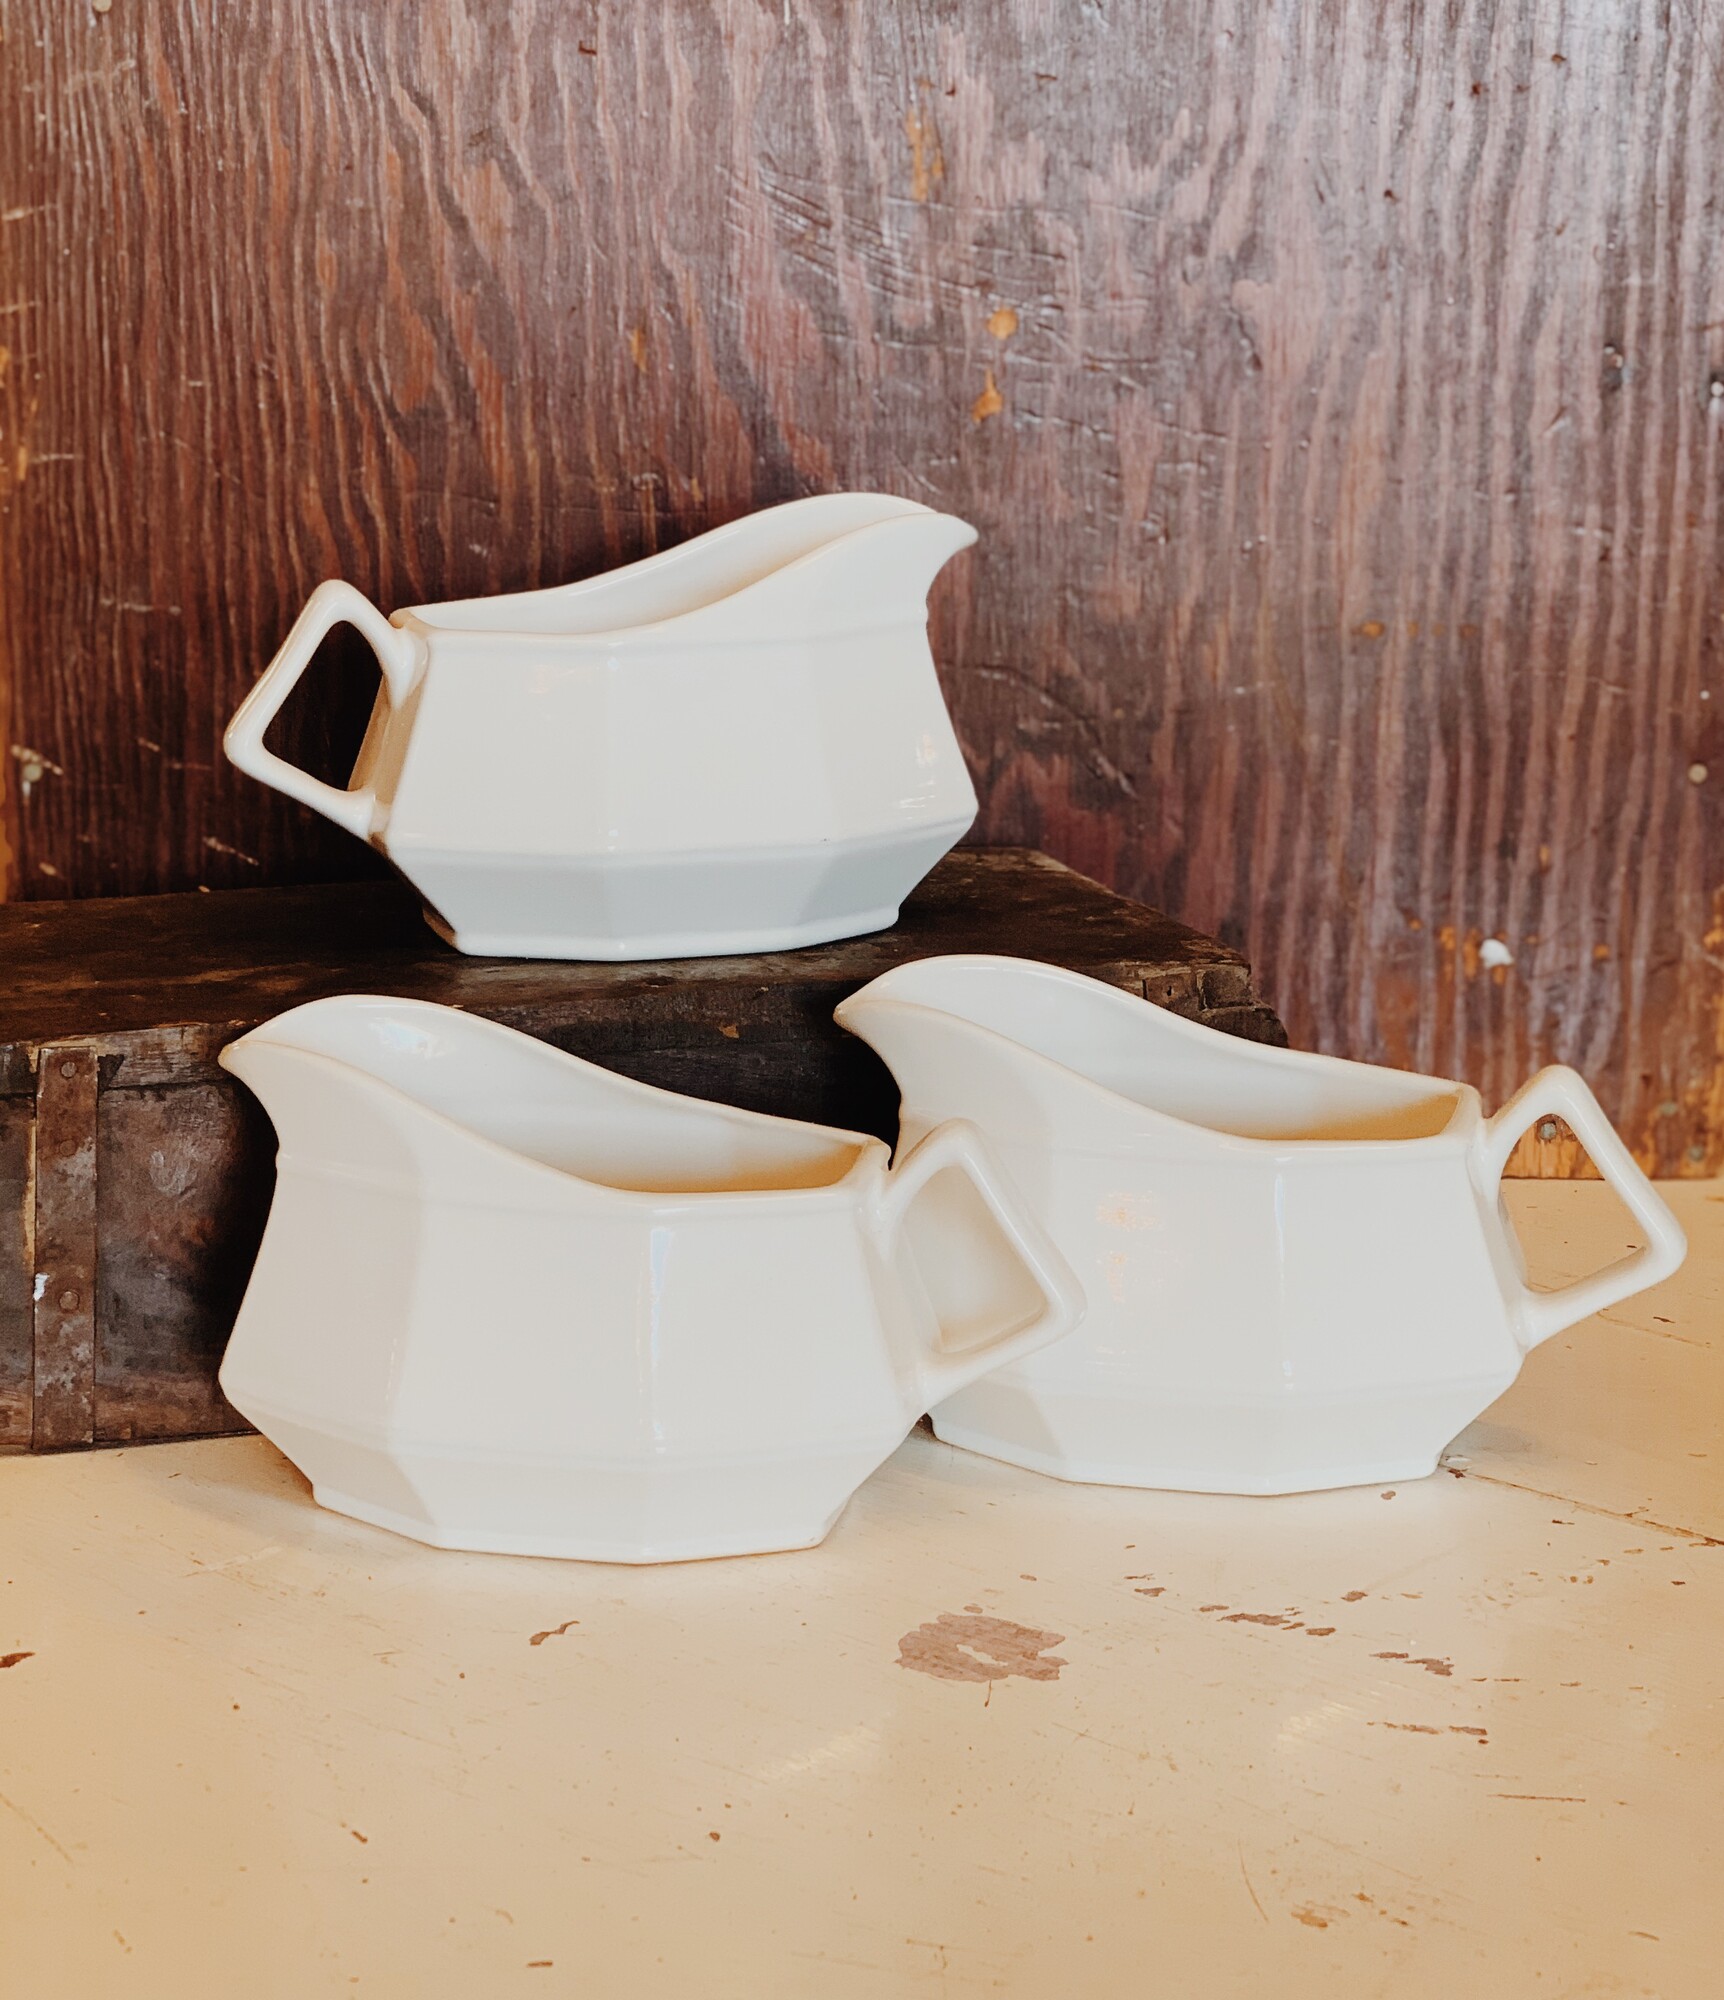 These beautiful gravy boats have a sleek design that gives them a vintage look. These are great for kitchen shelf decor, cabinet decor, or for actual serveware!

Measurements: 7.5 Inches x 3.75 Inches x 3.75 Inches